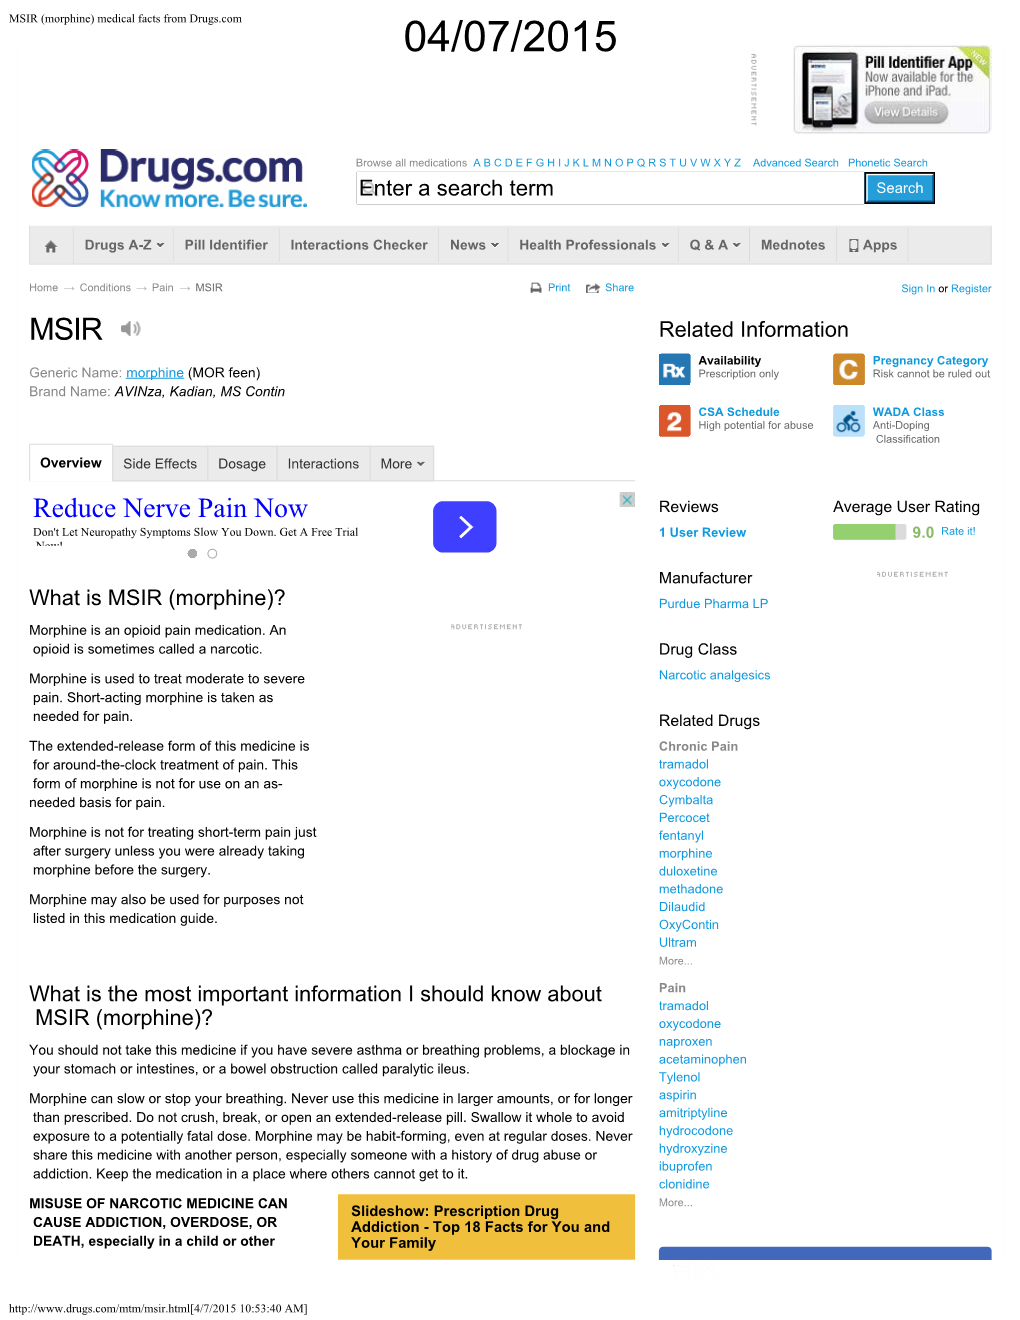 MSIR (Morphine) Medical Facts from Drugs.Com 04/07/2015